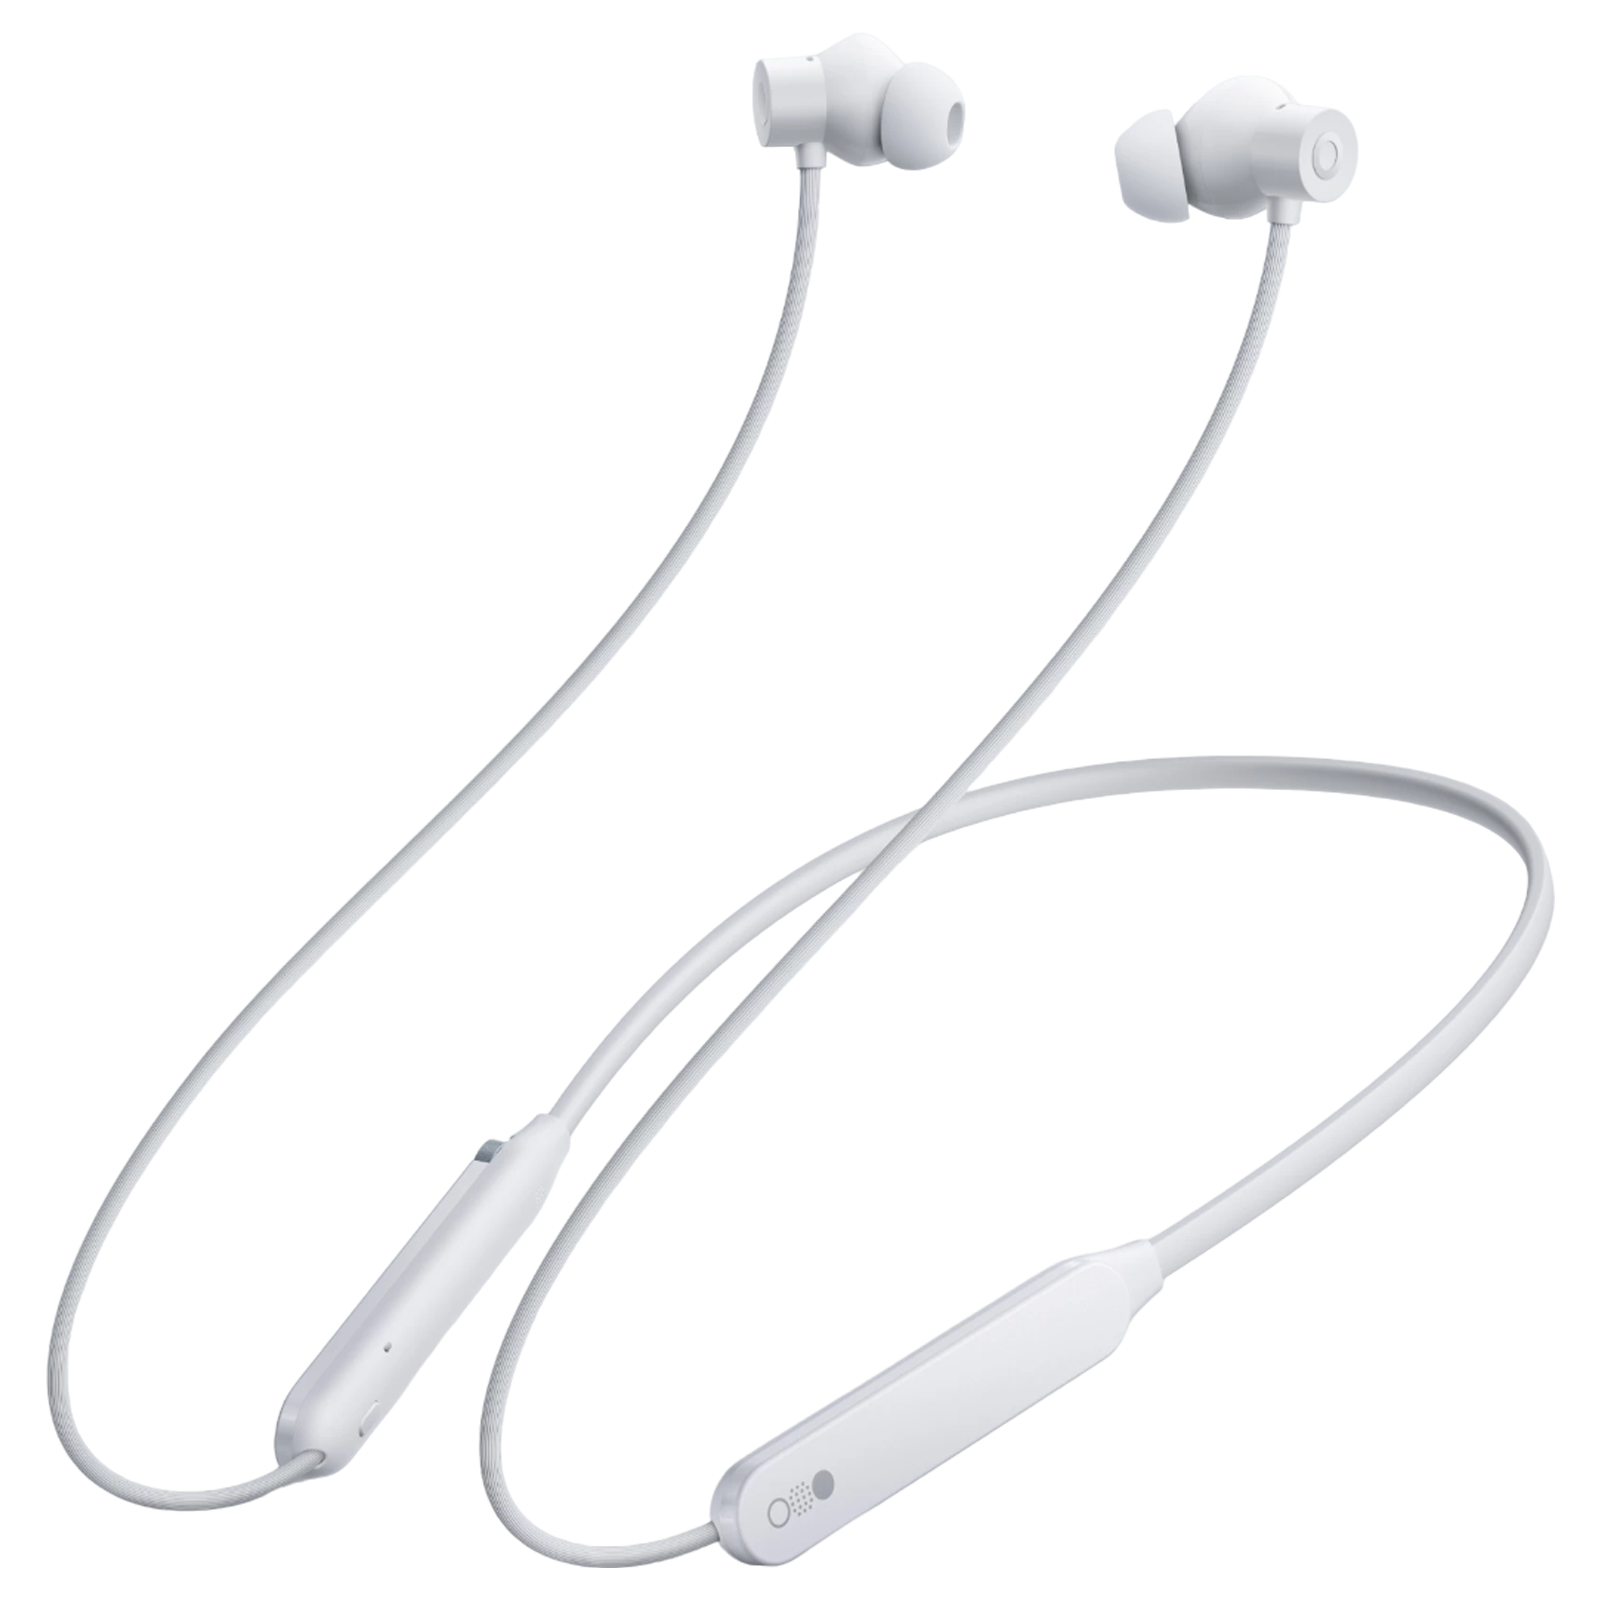 Nothing CMF Pro Neckband with Active Noise Cancellation (IP55 Water Resistant, Ultra Bass Technology, Light Grey)